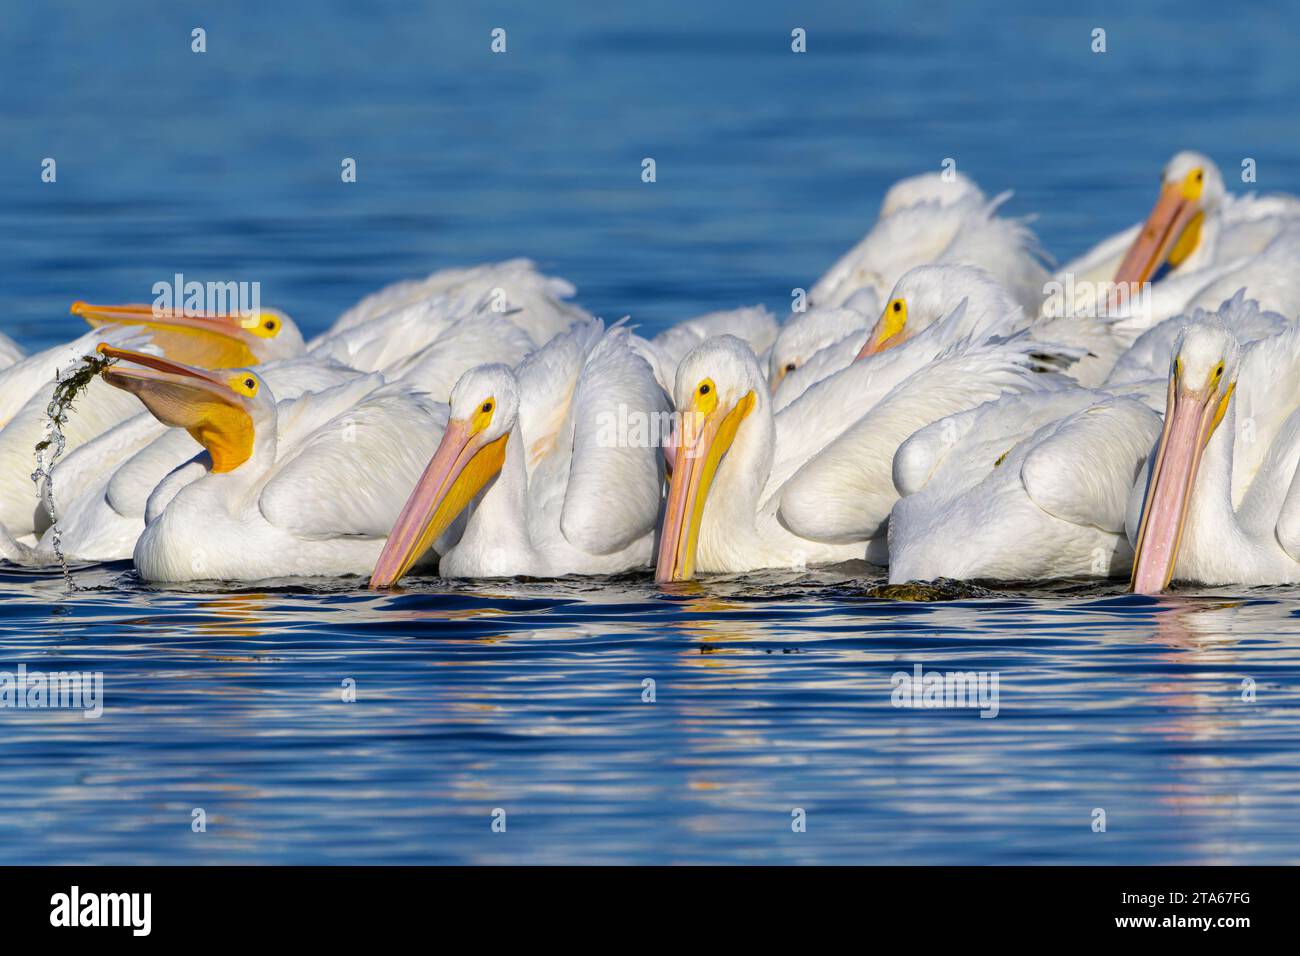 American white pelican (Pelecanus erythrorhynchos) flock of adults fishing together on water in Magrove swamp, Merrit Island, Florida, USA. Stock Photo